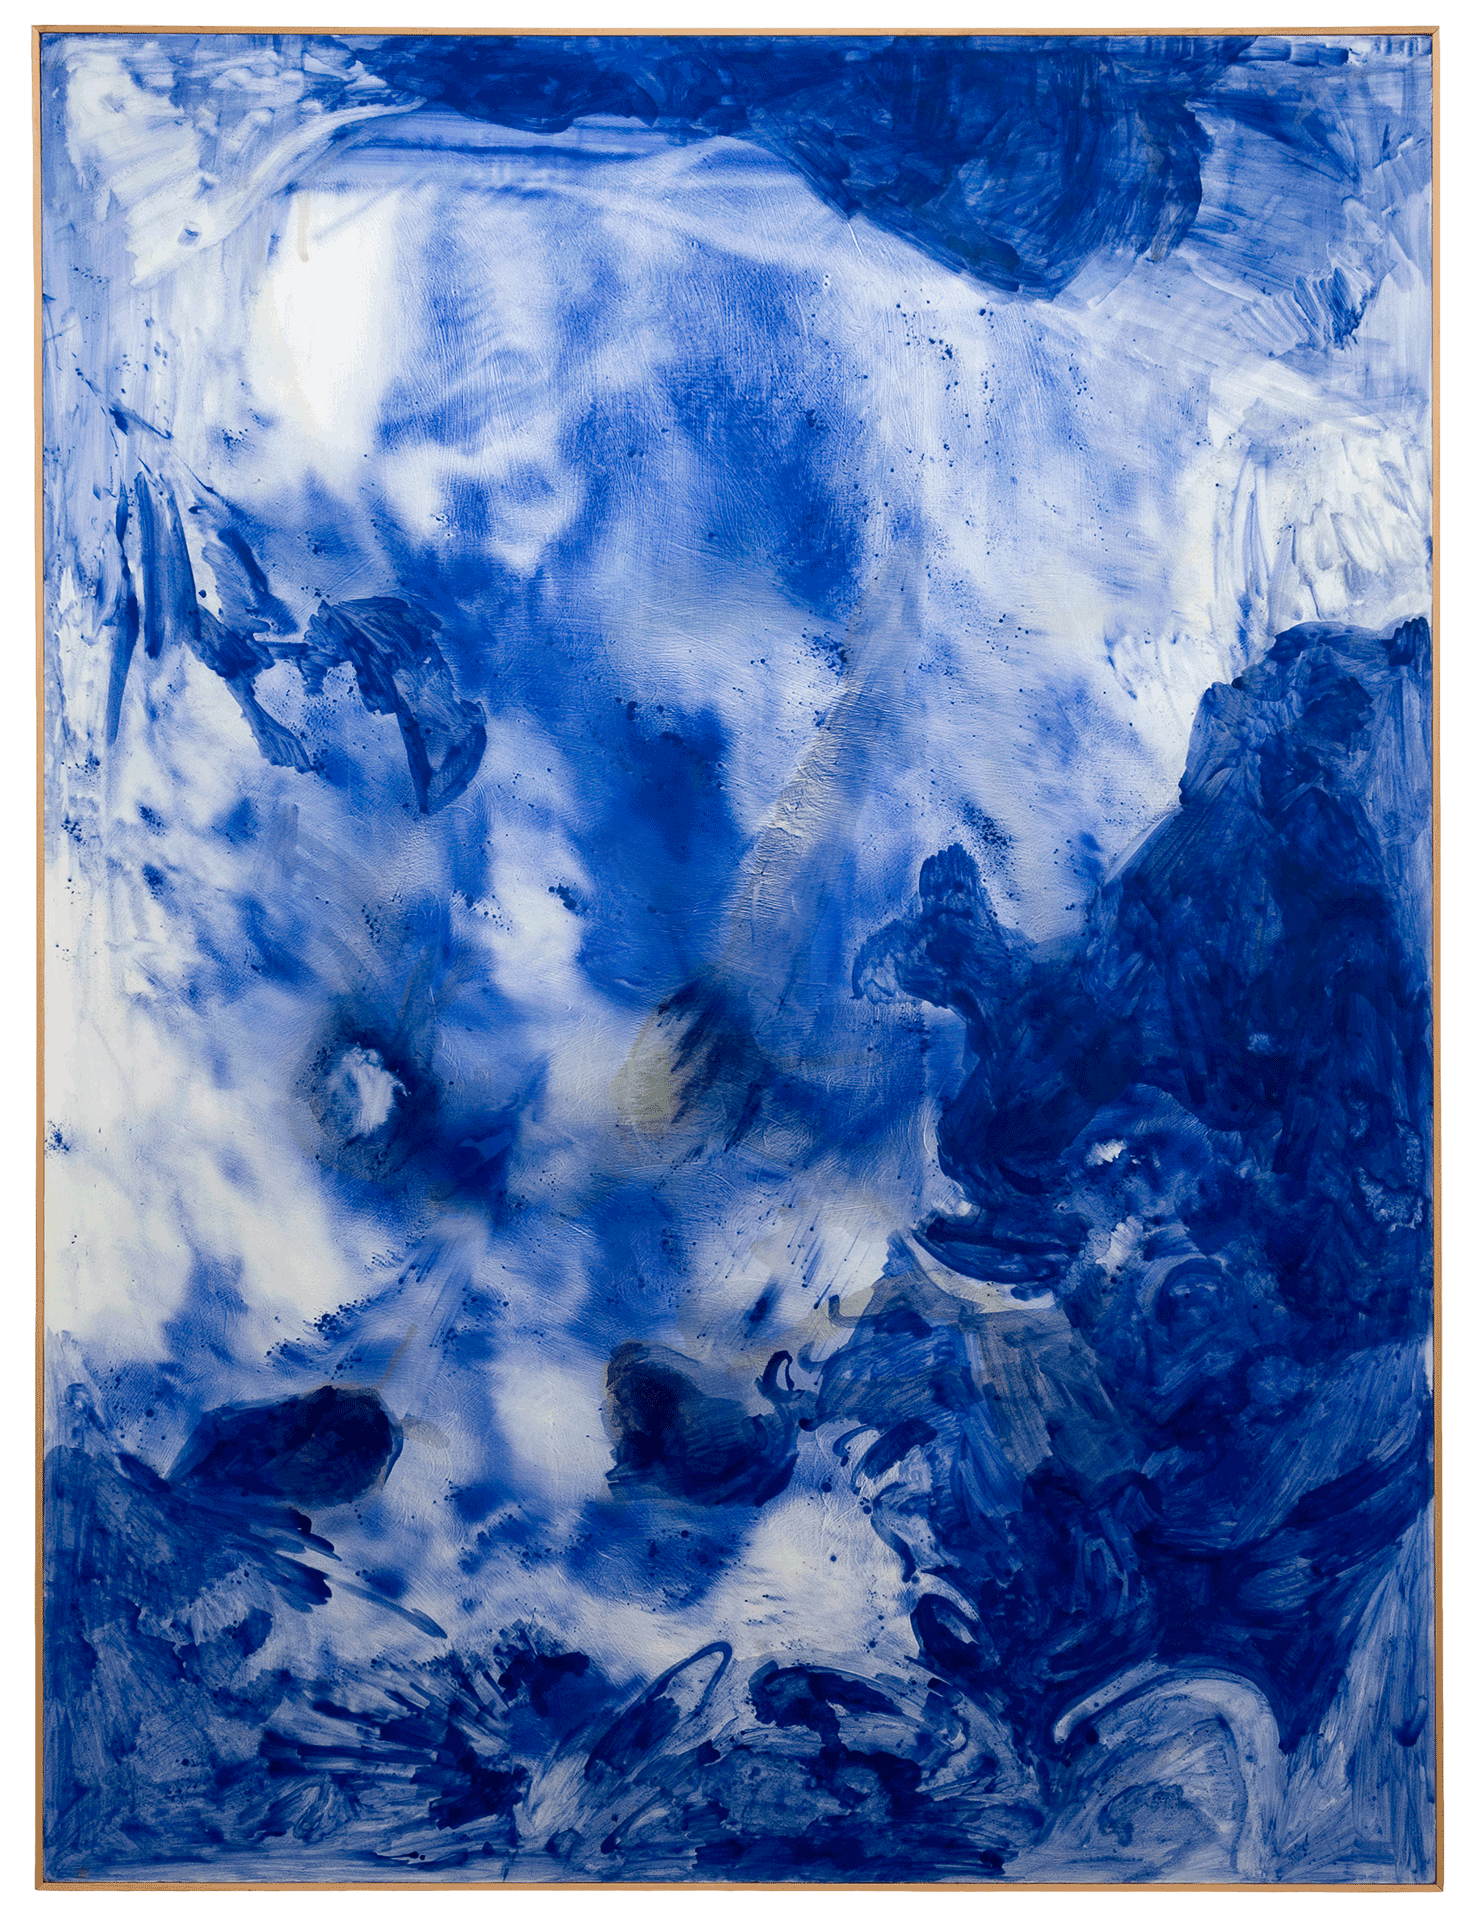 A painting by Sigmar Polke titled Lapis Lazuli II, dated 1994.